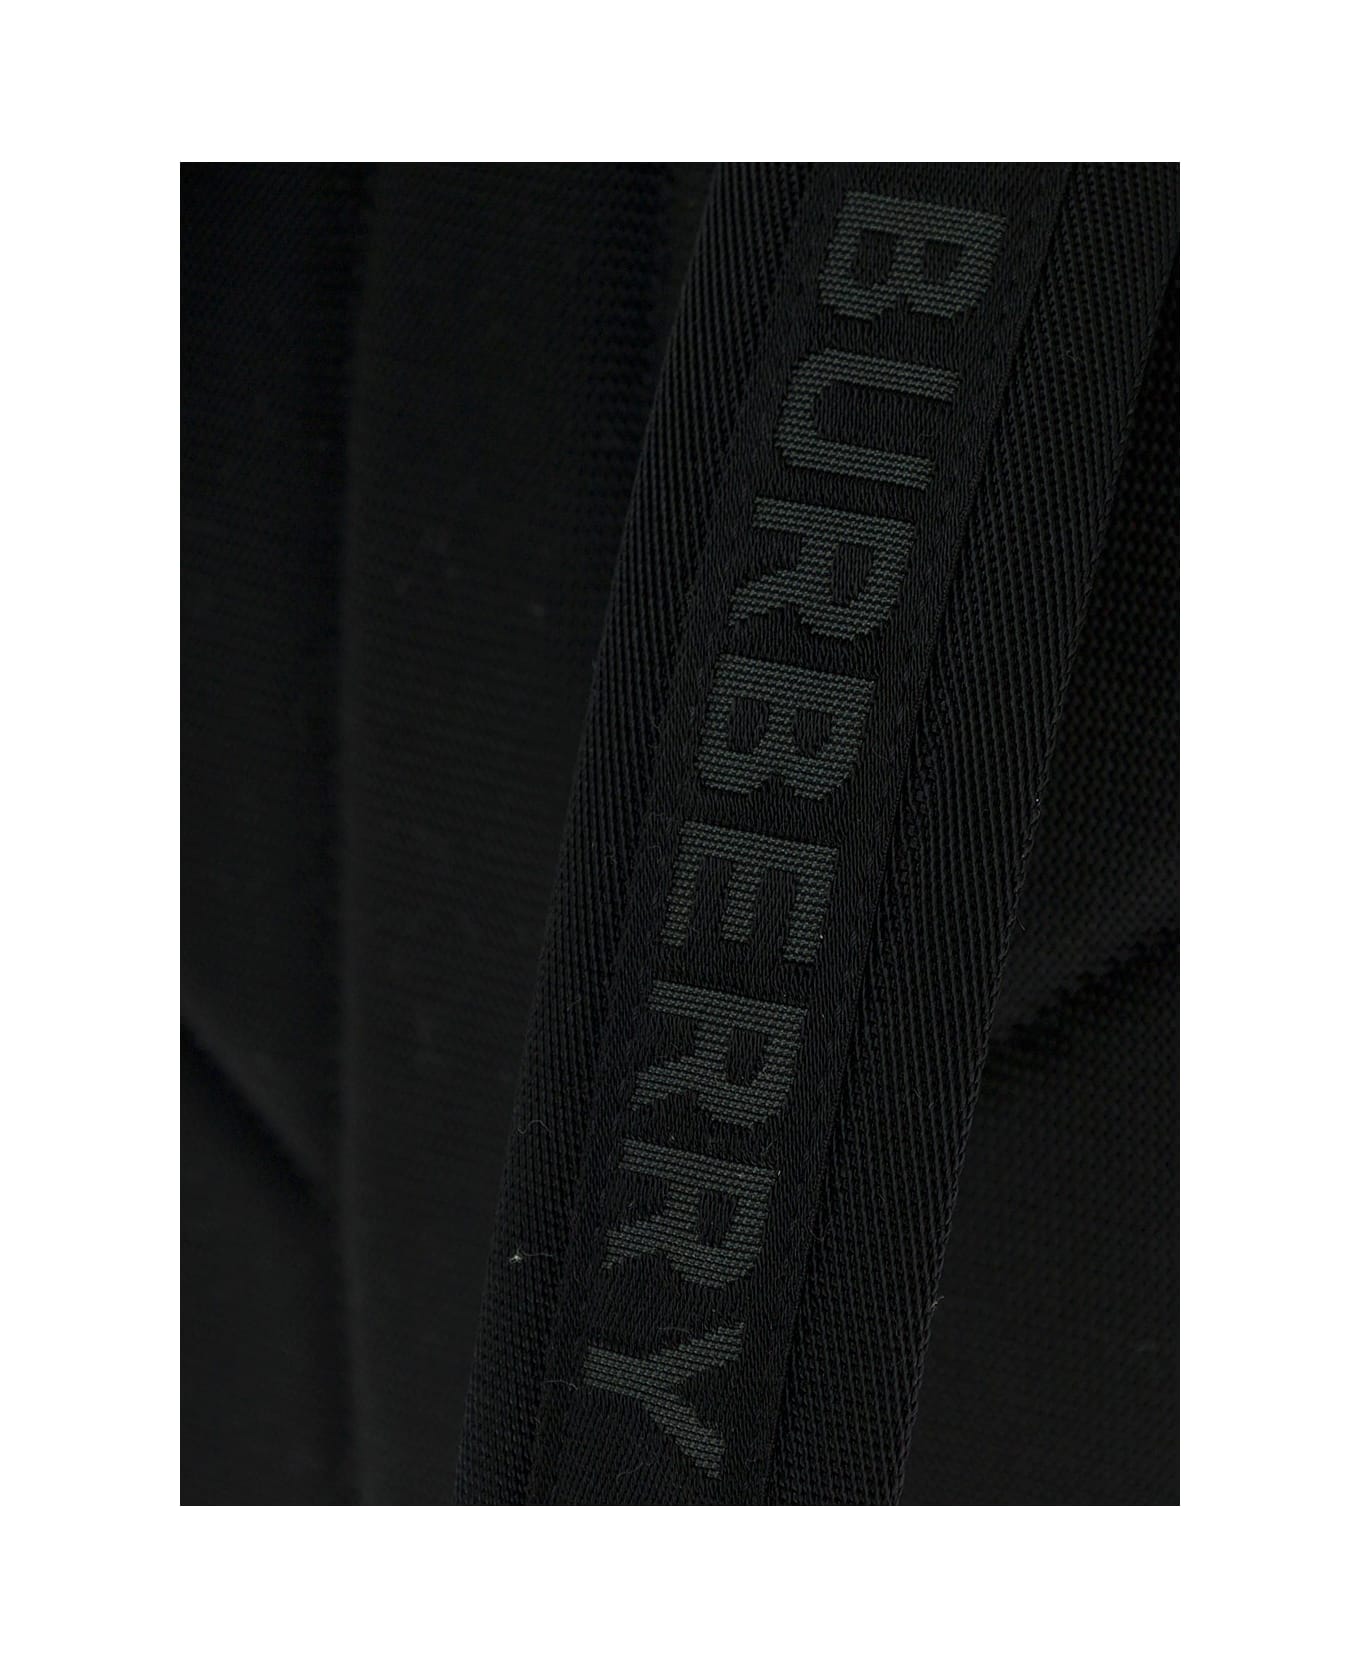 Burberry Man's Vintage Check Fabric Backpack - Beige